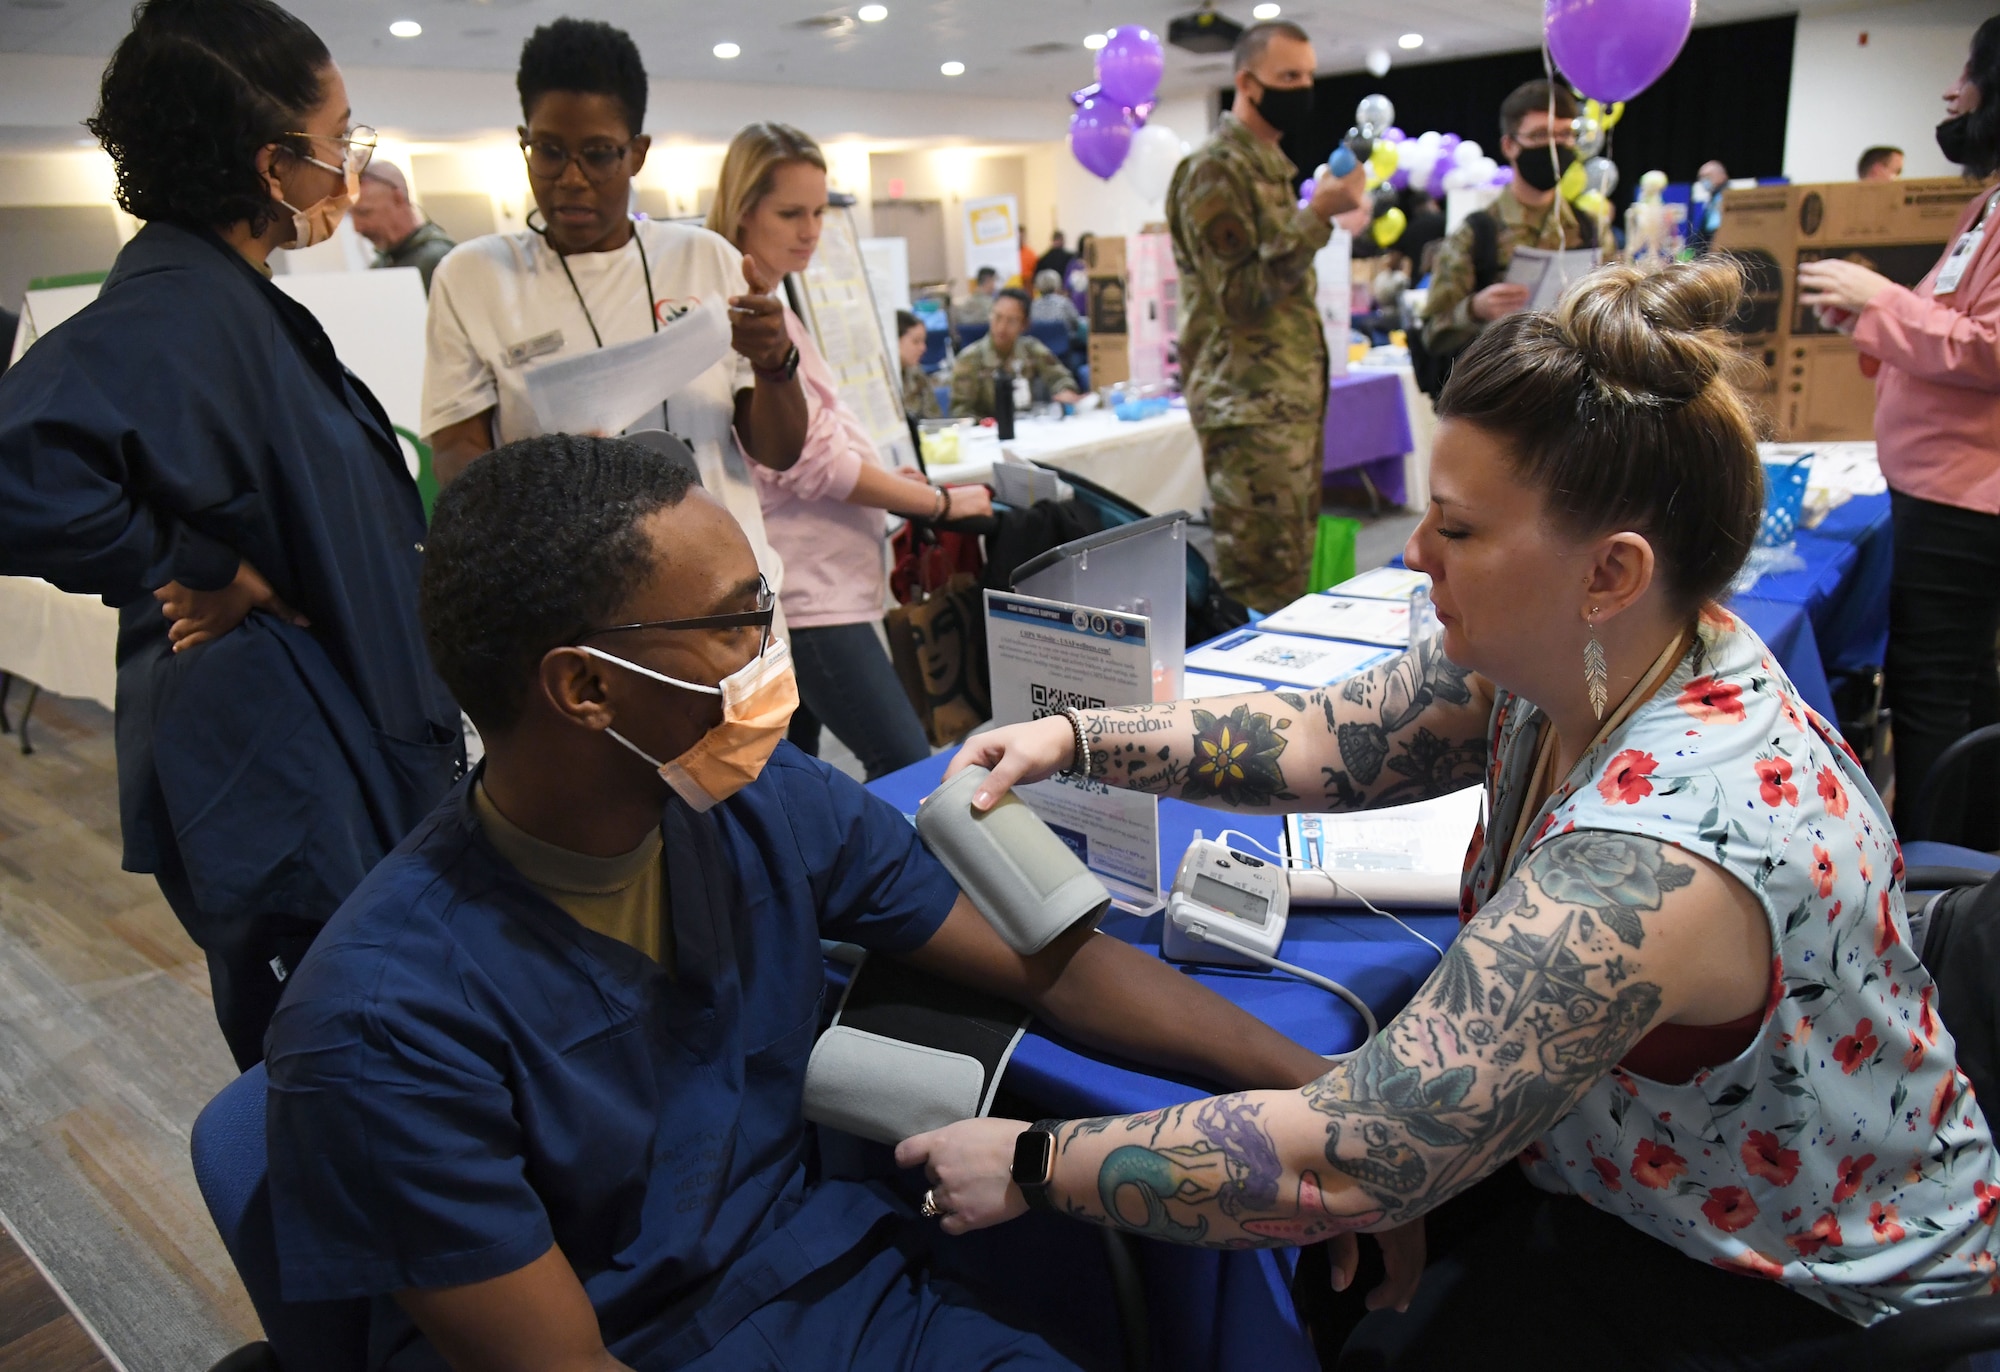 Jennifer Guy, 81st Training Wing health promotion specialist, provides a wellness screening on U.S. Air Force Airman 1st Class Gabriel Dudley, 81st Dental Squadron dental technician, during the 11th Annual 81st Medical Group Health Expo inside the Keesler Medical Center auditorium at Keesler Air Force Base, Mississippi, October 7, 2022. The 81st MDG hosted the walk-in event, which included information booths and scheduling appointments for multiple types of cancer and chronic diseases in honor of Breast Cancer Awareness Month. (U.S. Air Force photo by Kemberly Groue)